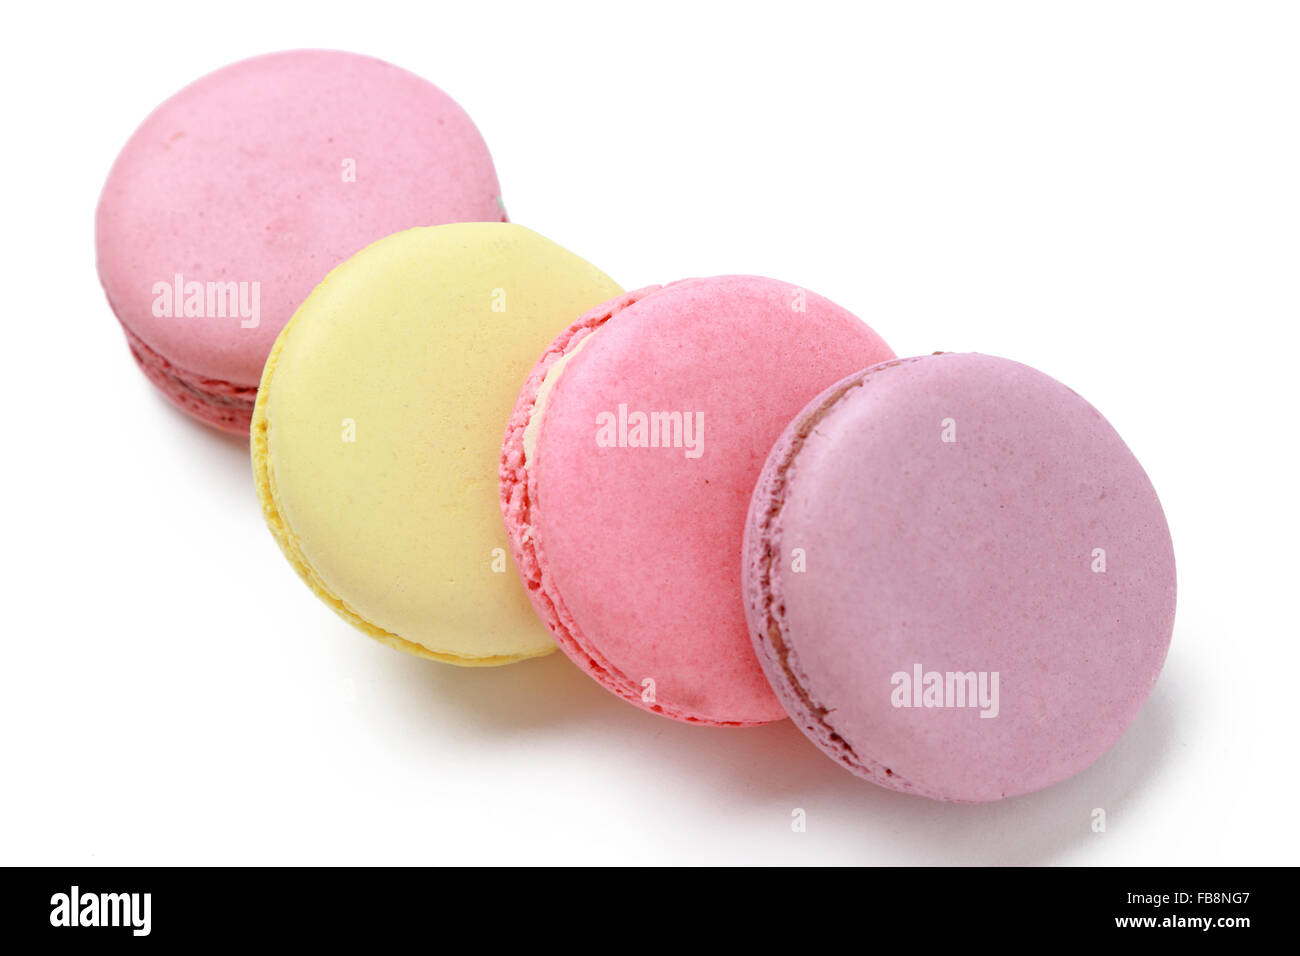 Delicious and colorful French macaroons Stock Photo